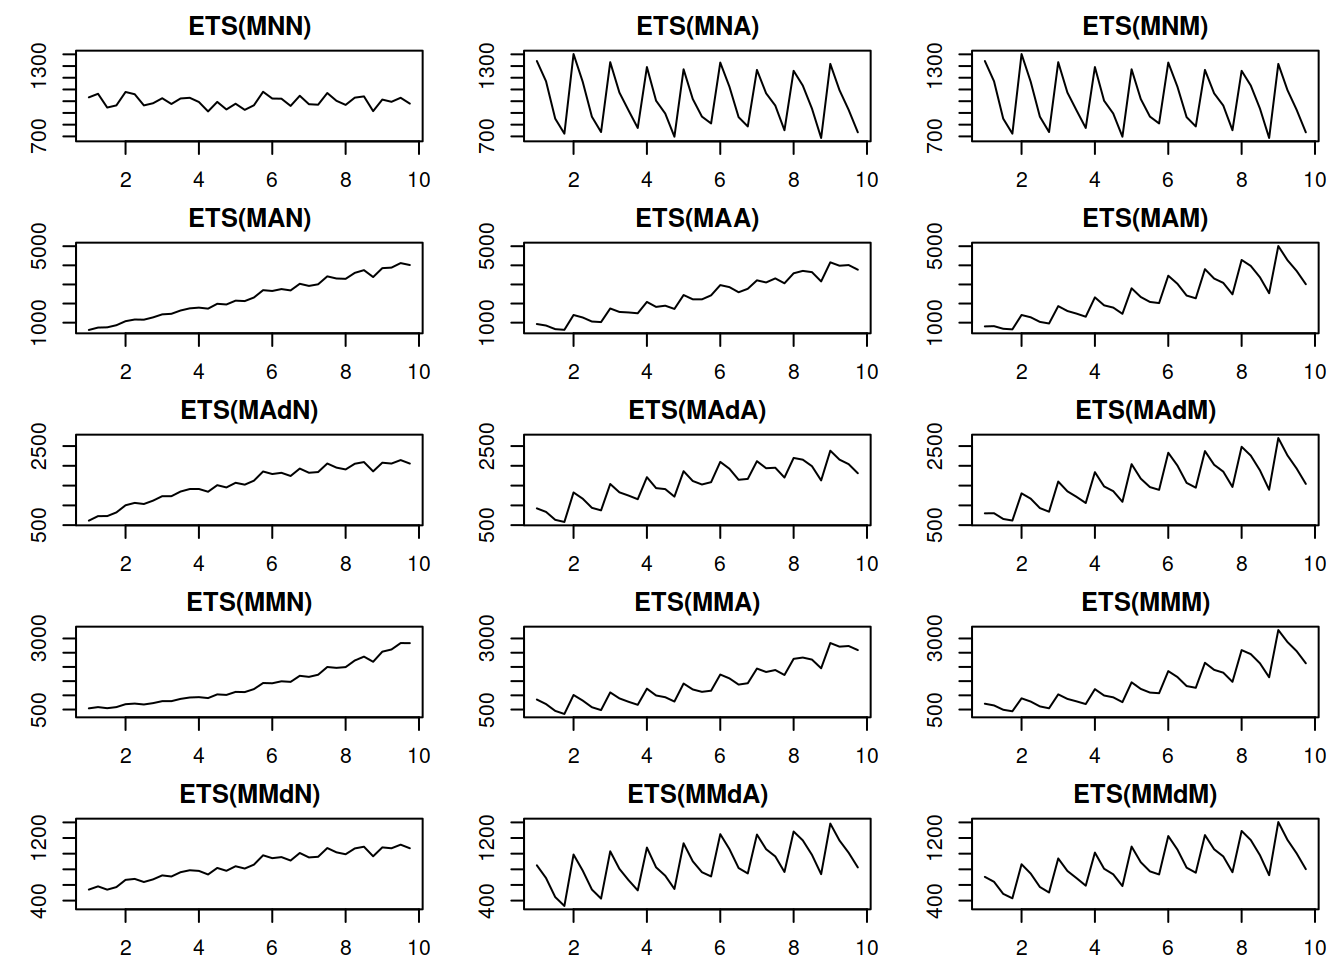 Time series corresponding to the multiplicative error ETS models.